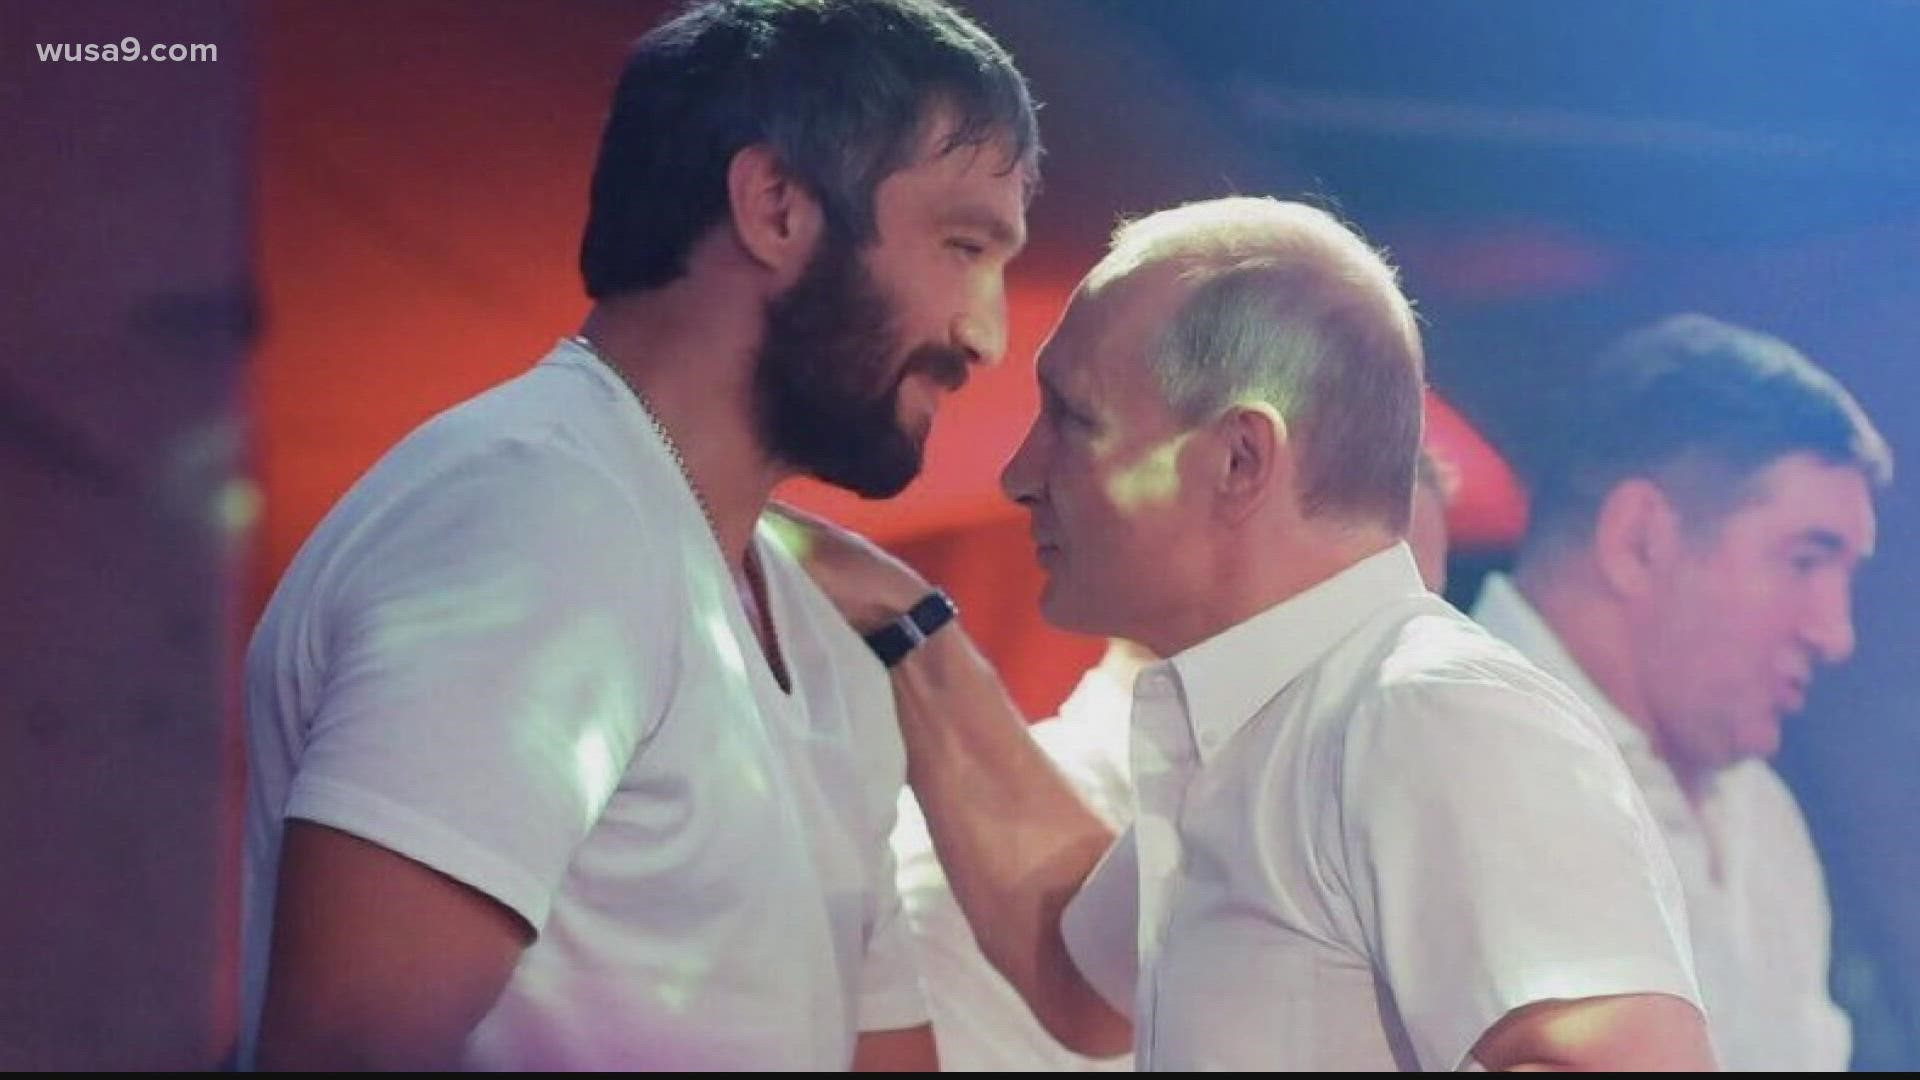 Ovechkin called Russia and Ukraine "different countries" and called for "no more war." However, the Russian athlete did not condemn Vladimir Putin or the Kremlin.